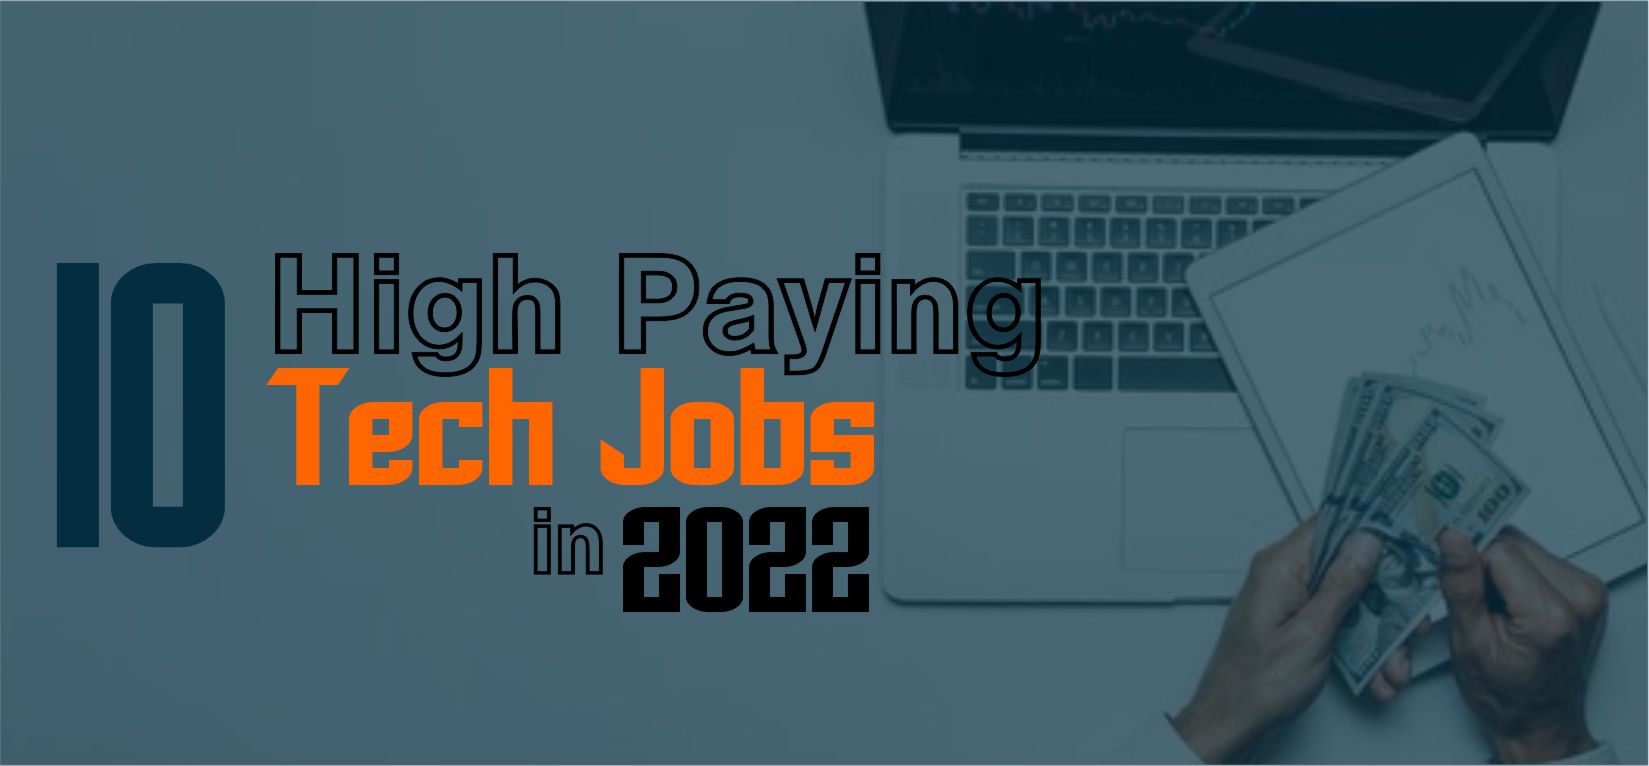 You are currently viewing 10 High Paying Tech Jobs In 2022